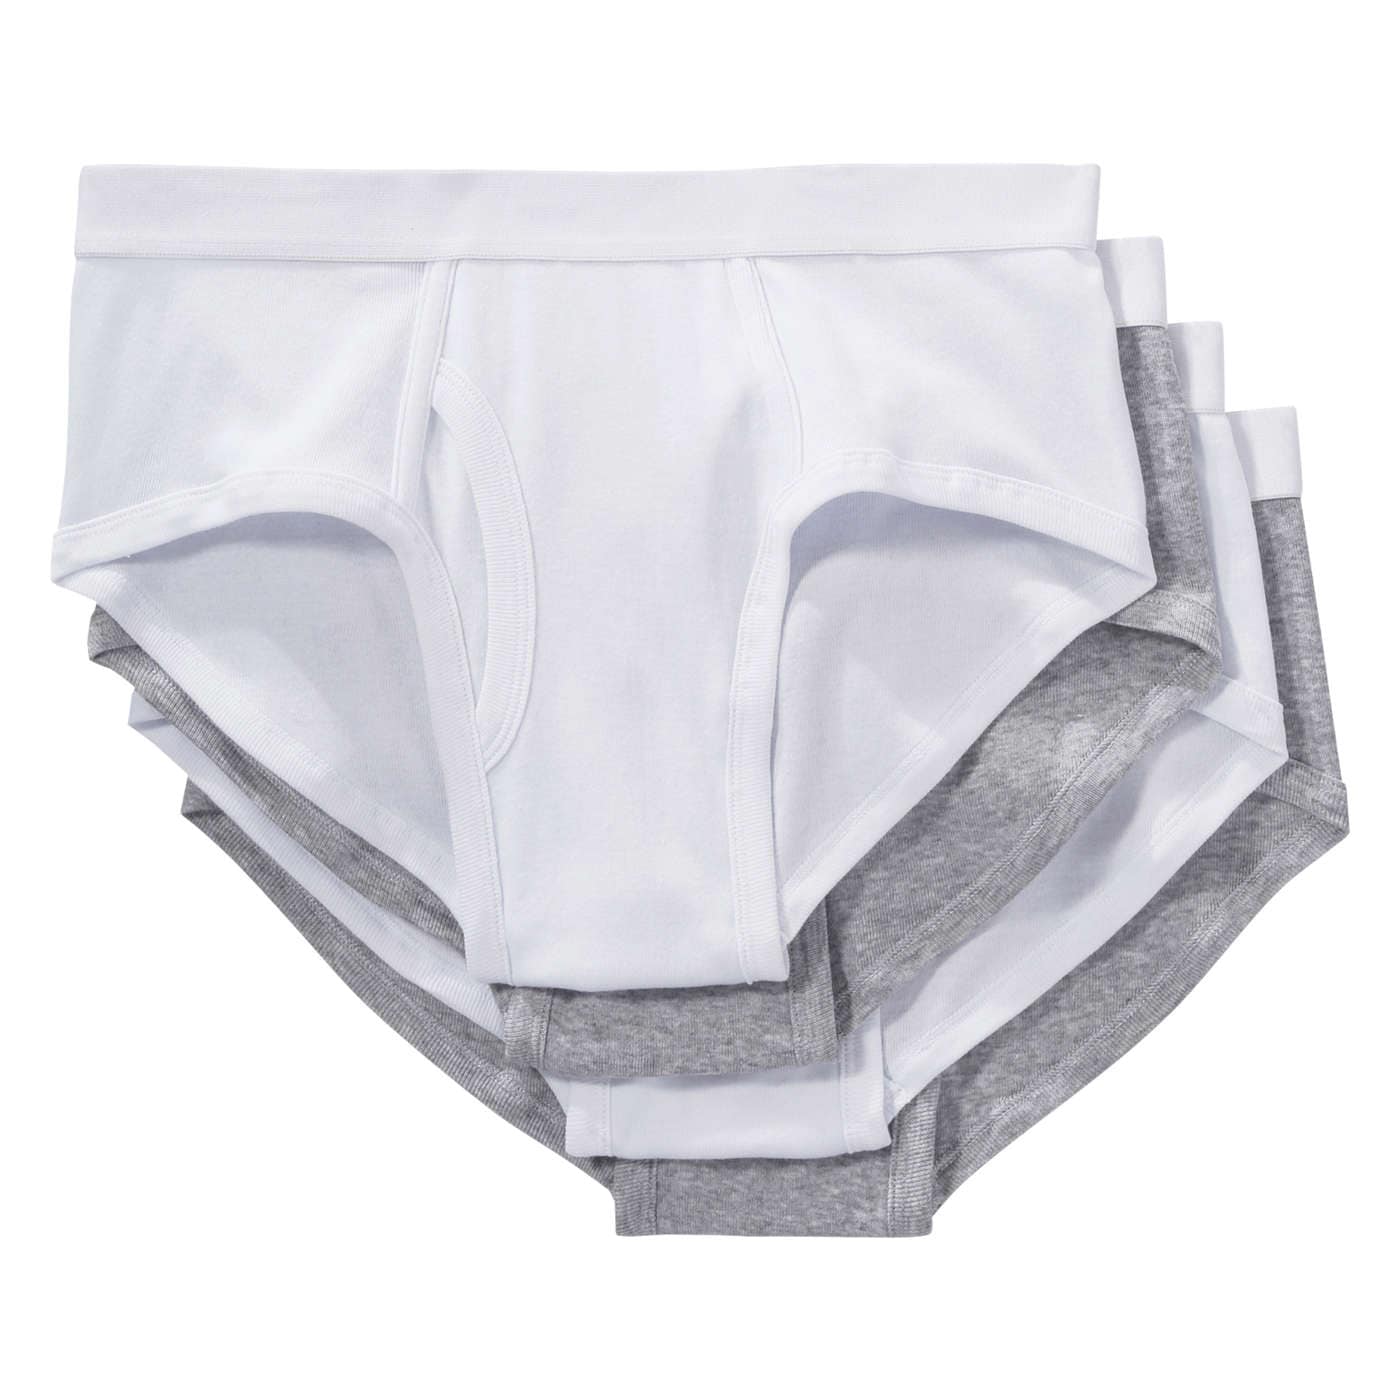 White 4 pack Woven Pure Cotton Boxers